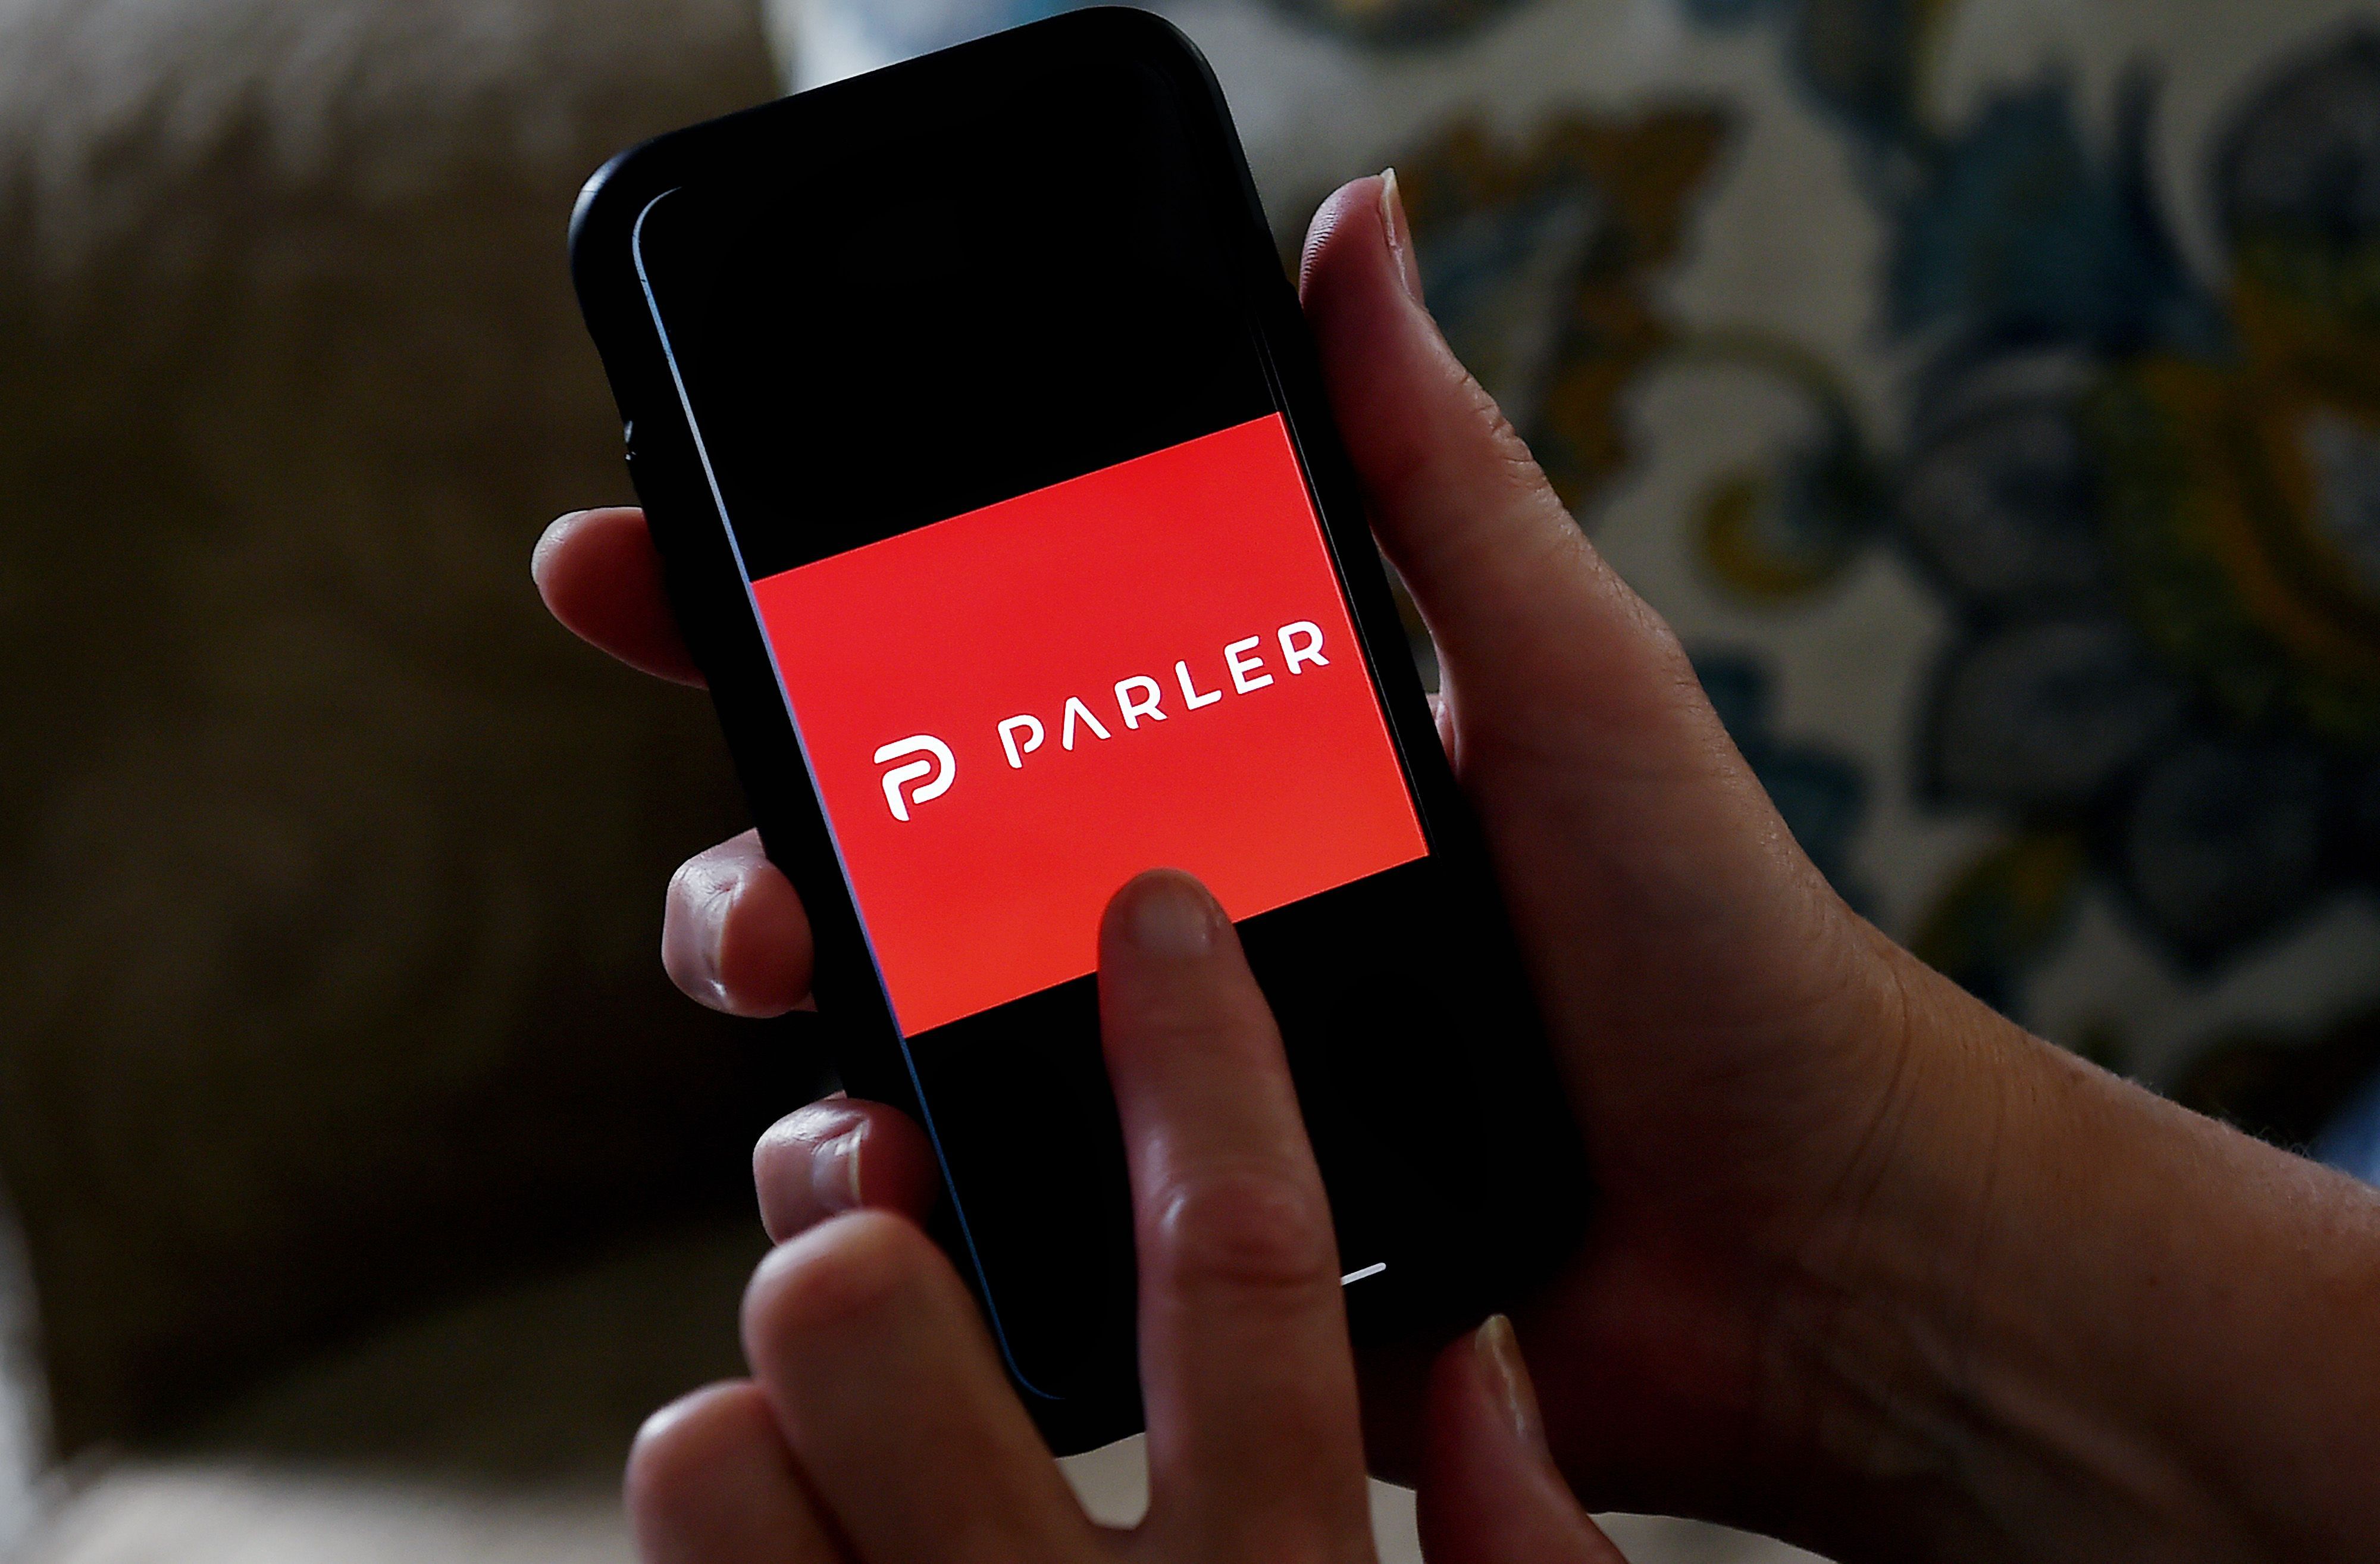 By Saturday, Apple and Google had removed Parler from their app stores, limiting its ability to reach new users on virtually all of the world’s smartphones. Credit: AFP